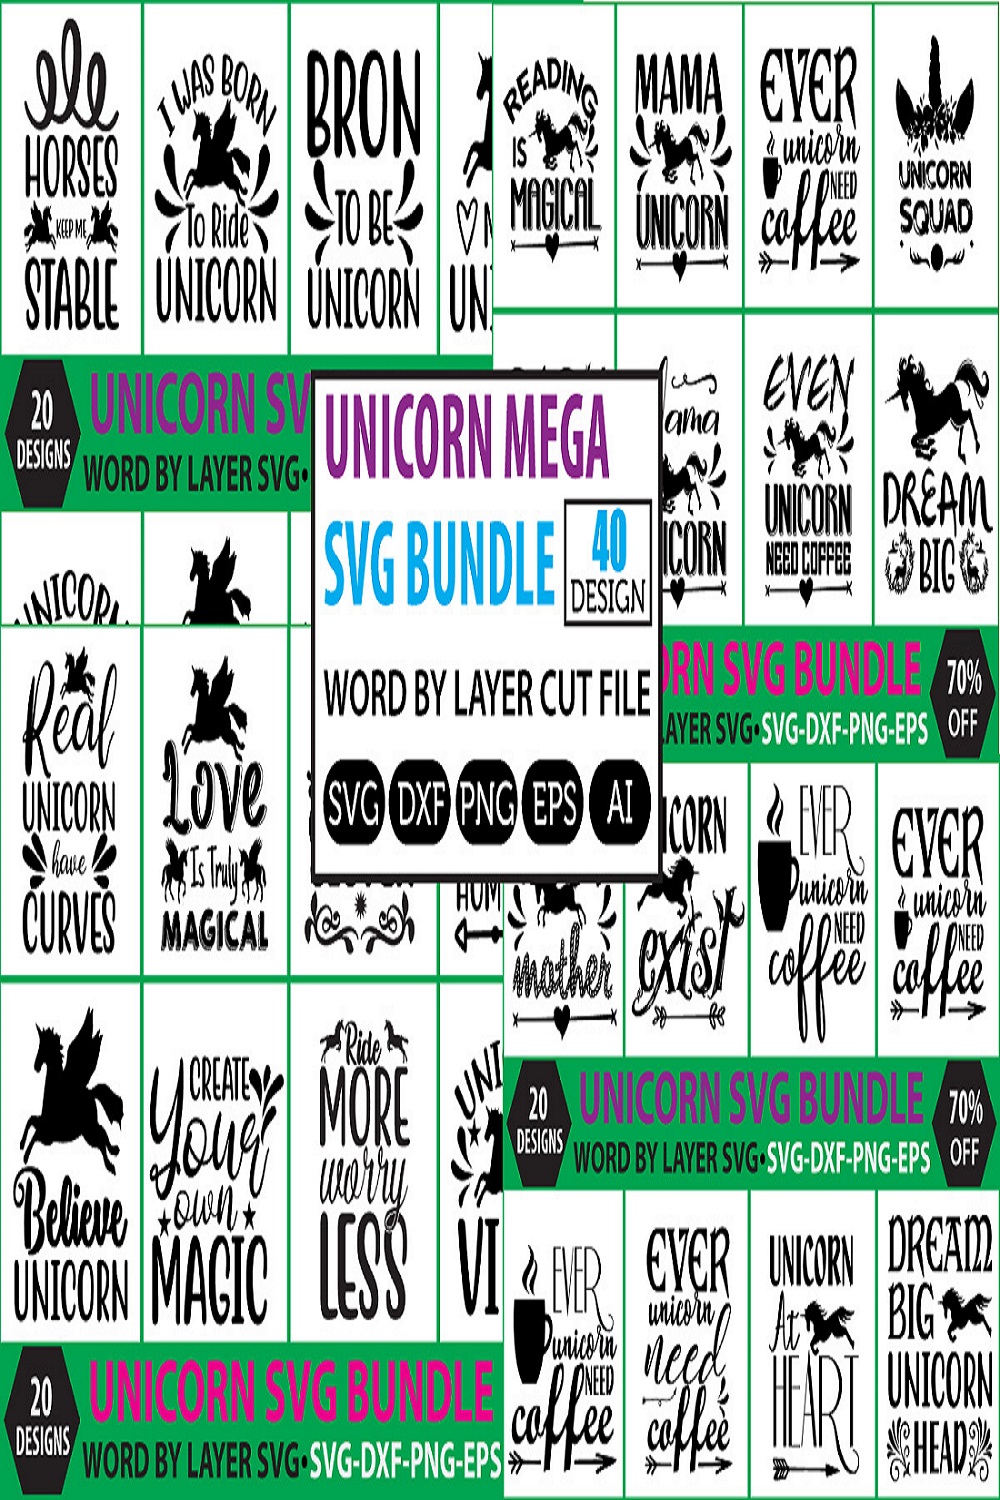 A set of unique images for prints on the theme of unicorns